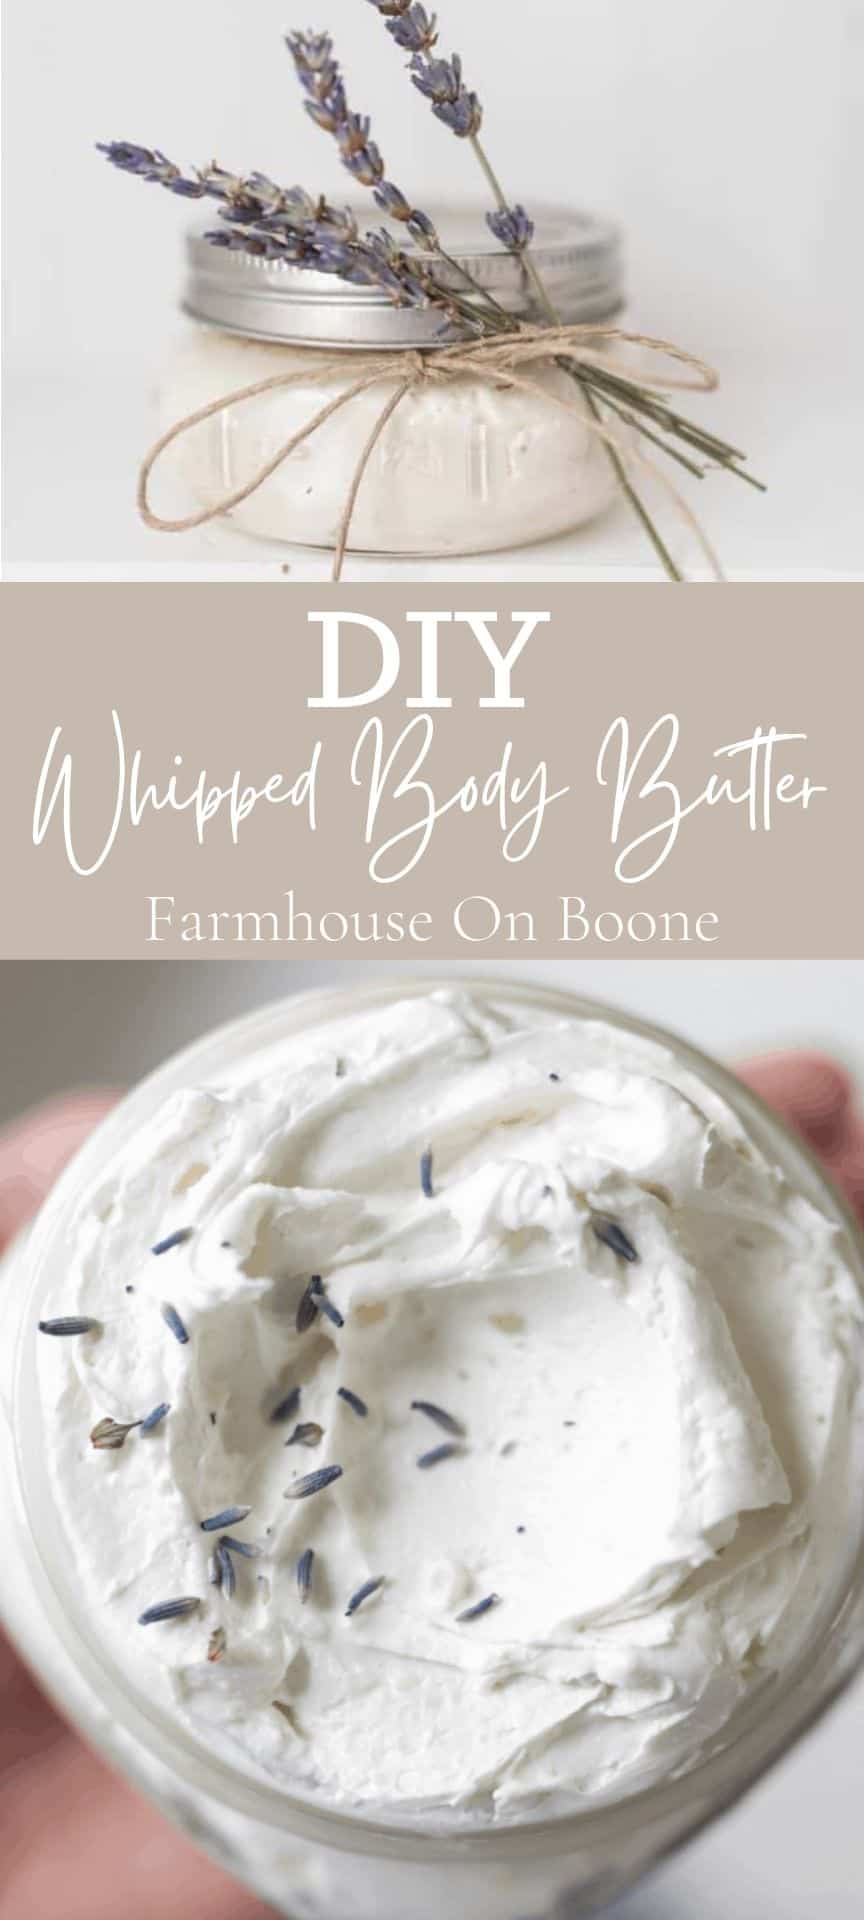 Whipped Homemade Body Butter Recipe With Beeswax